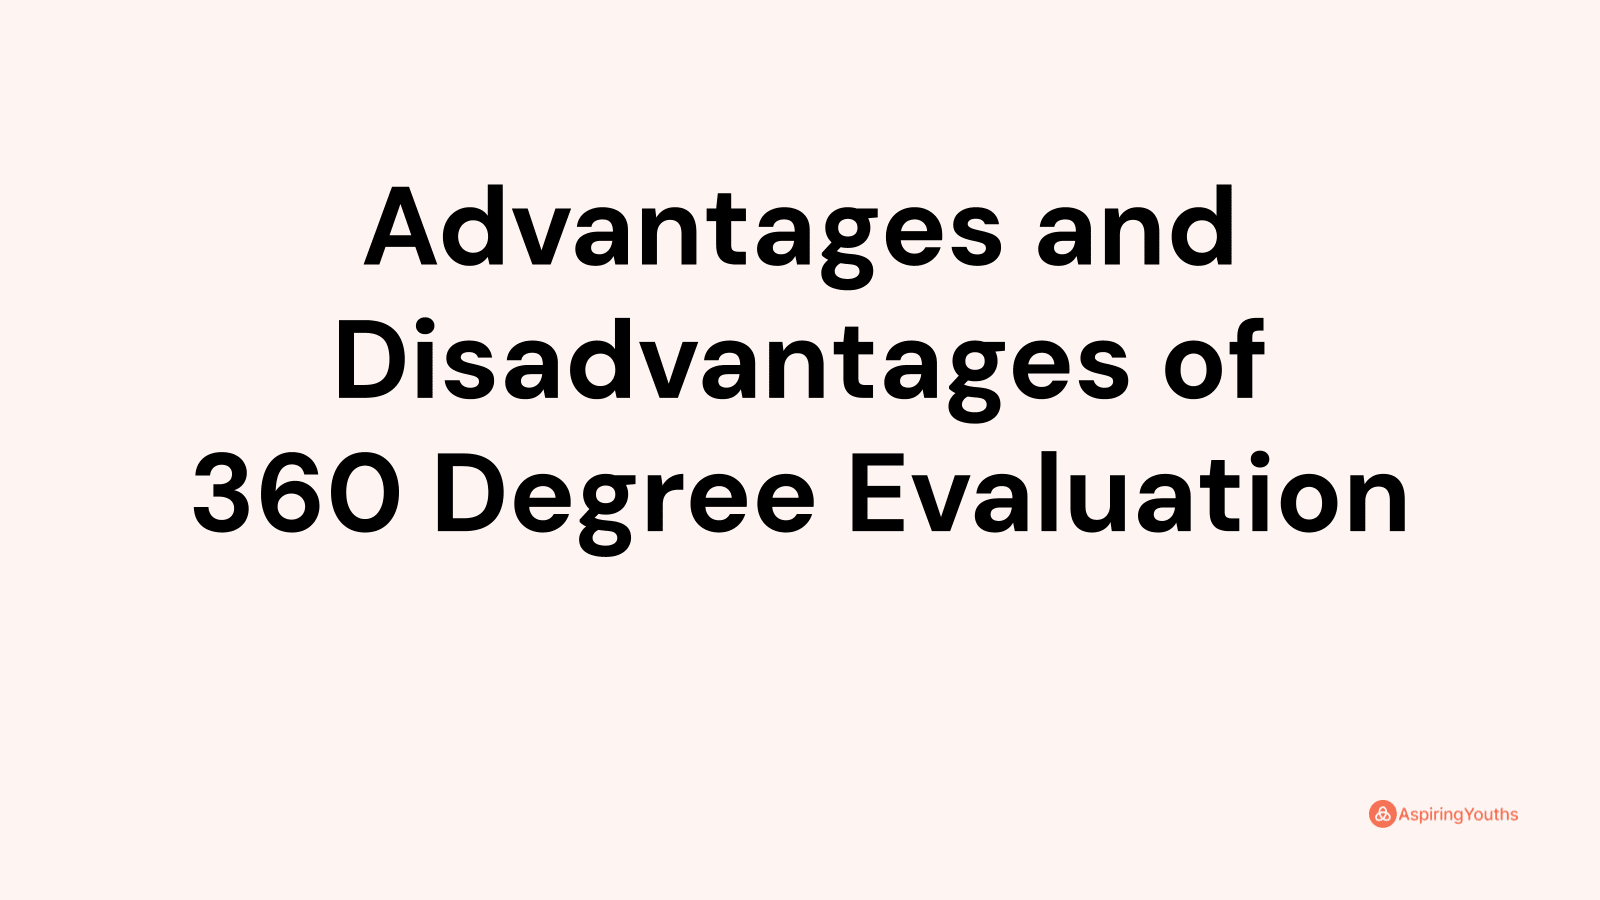 Advantages and disadvantages of 360 Degree Evaluation